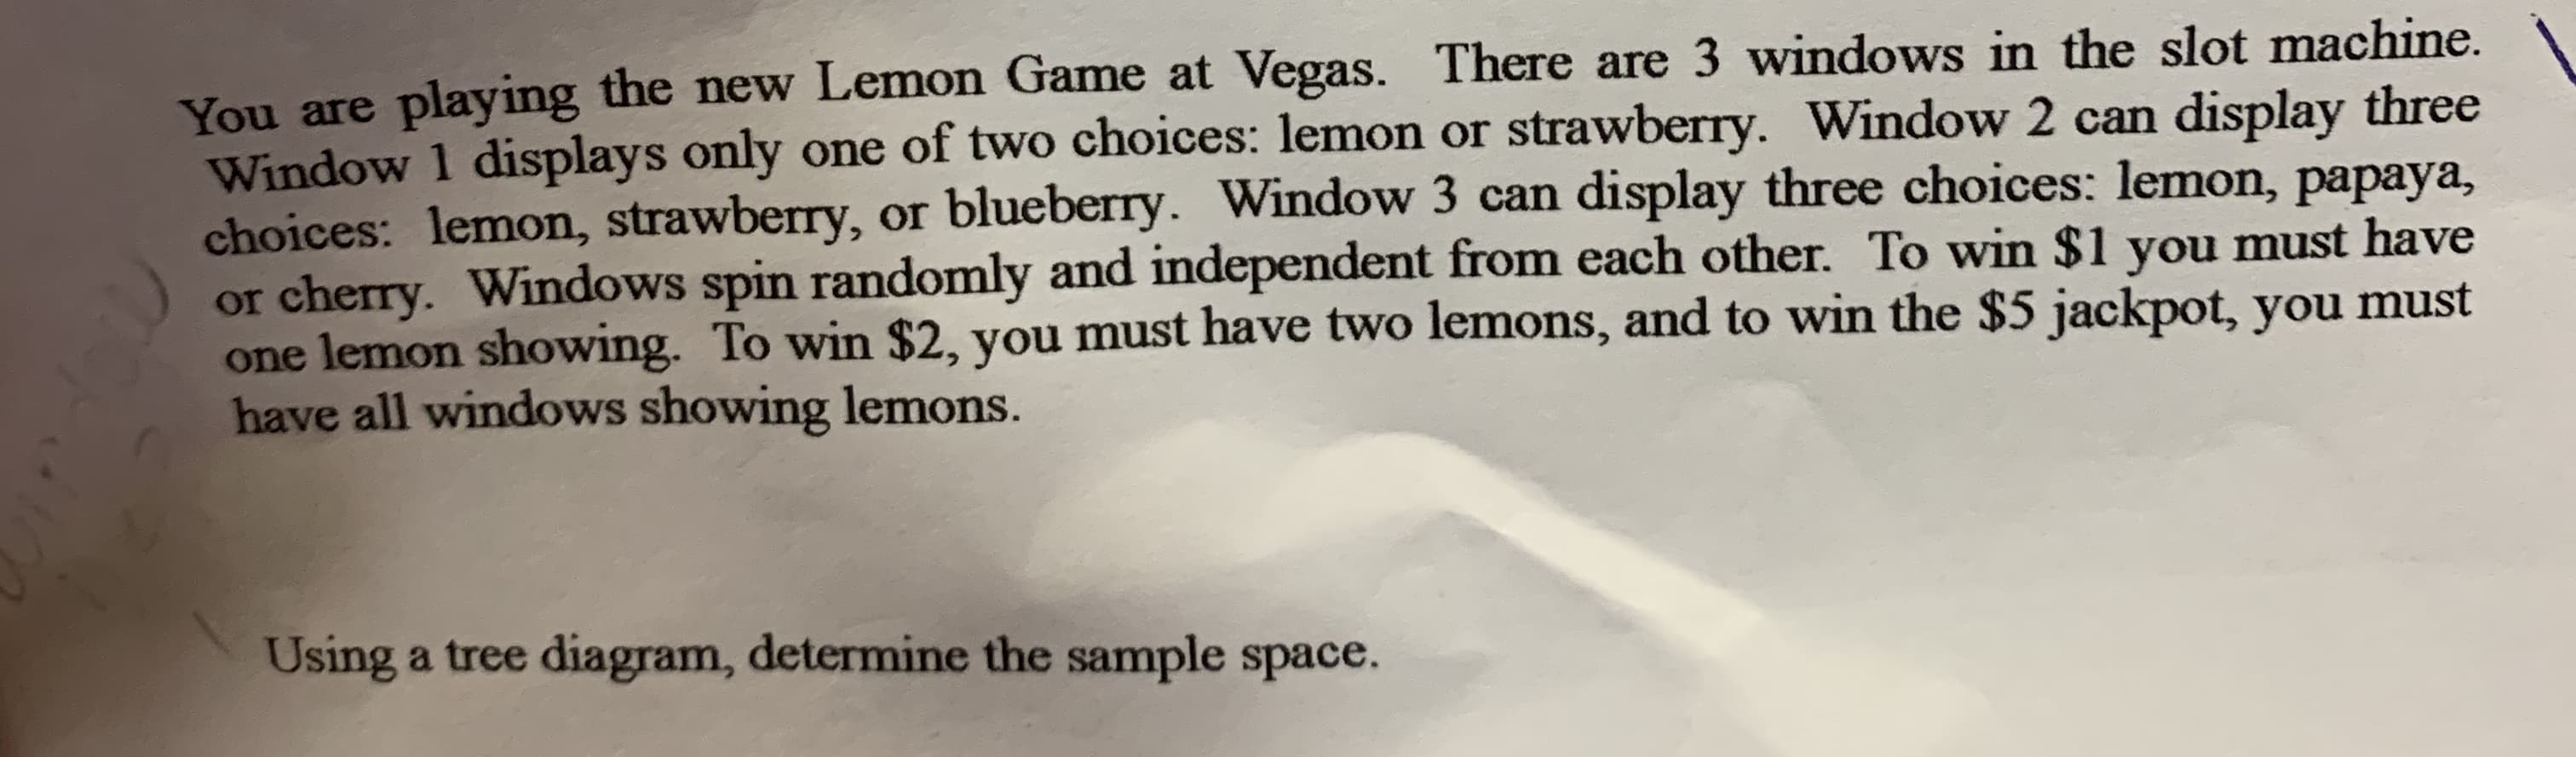 You are playing the new Lemon Game at Vegas. There are 3 windows in the slot machine.
Window 1 displays only one of two choices: lemon or strawberry. Window 2 can display three
choices: lemon, strawberry, or blueberry. Window 3 can display three choices: lemon, papaya,
or cherry. Windows spin randomly and independent from each other. To win $1 you must have
one lemon showing. To win $2, you must have two lemons, and to win the $5 jackpot, you must
have all windows showing lemons.
Using a tree diagram, determine the sample space.
